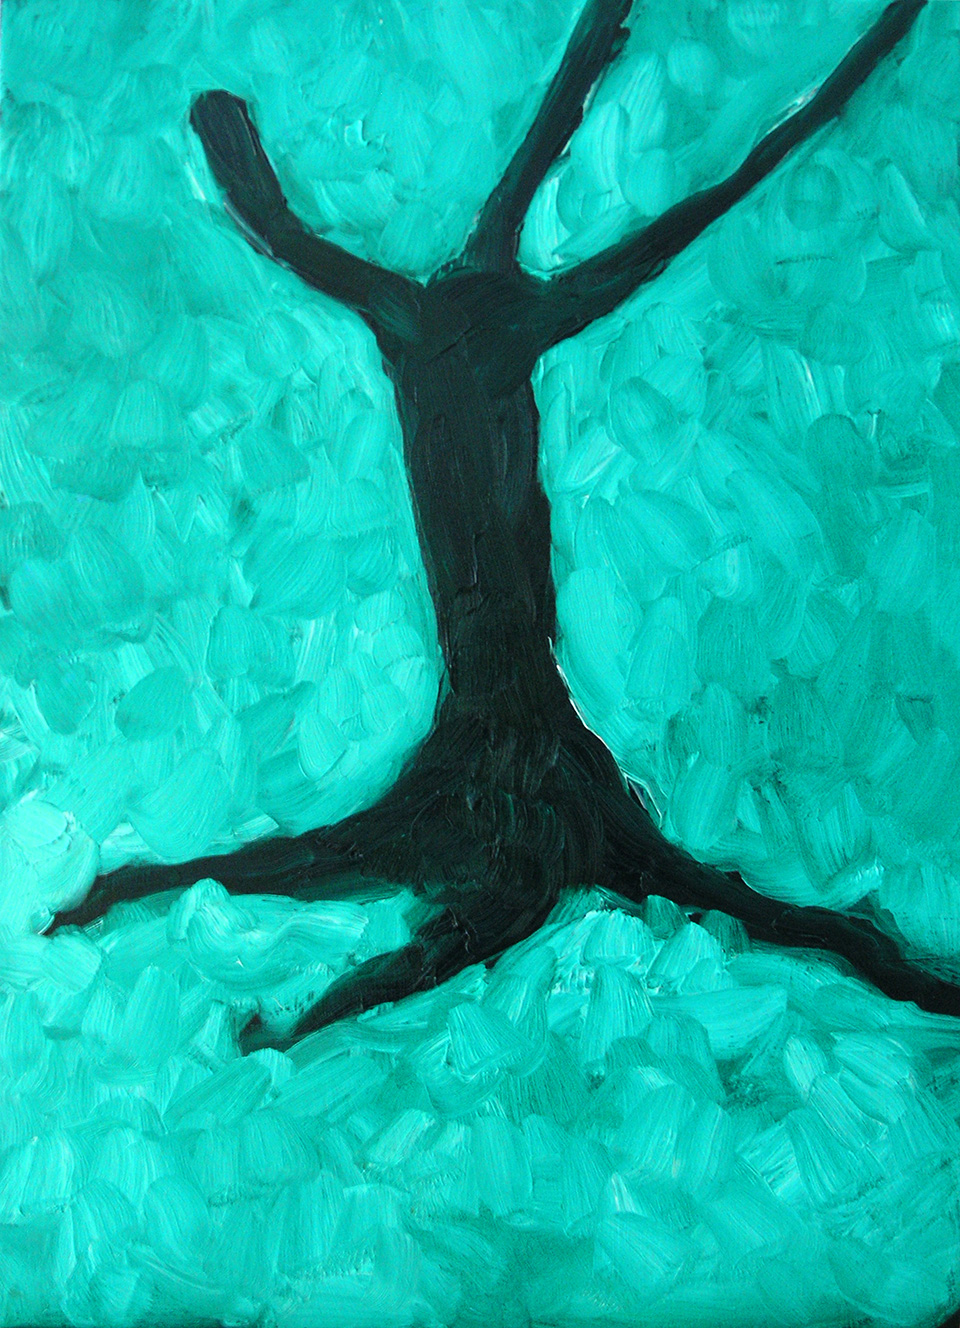 Tree 7, a painting by Guido Vrolix